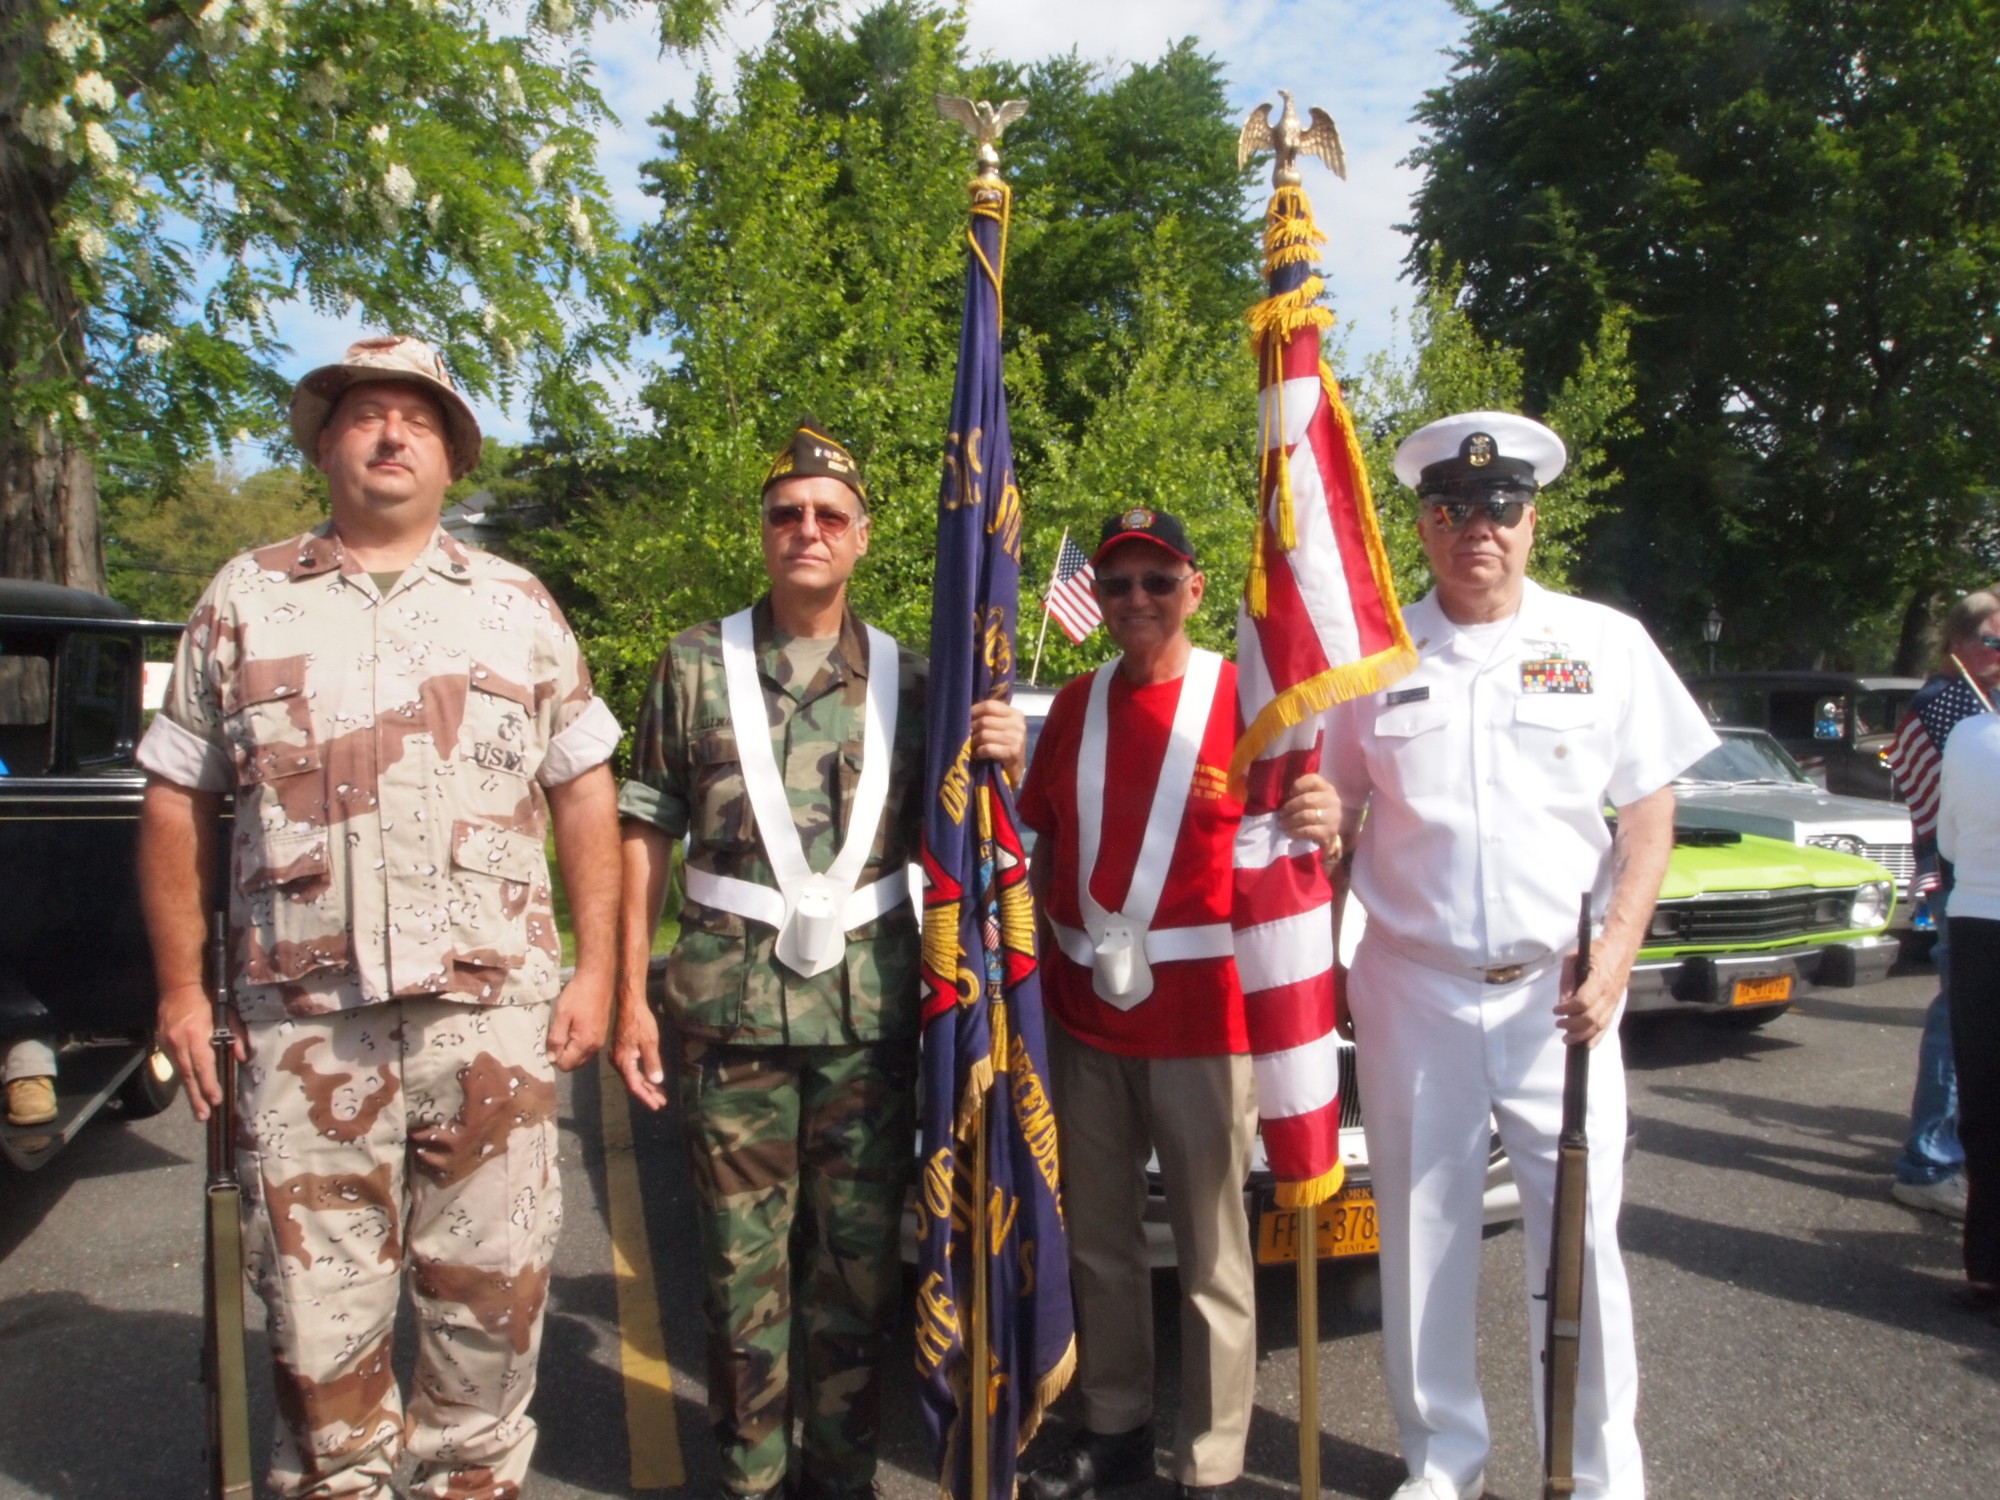 Left to right, Cyrus Vaseghi,  Ray Litwin, Jim Moreno and James Taylor  are getting ready to lead the Memorial Day Parade.